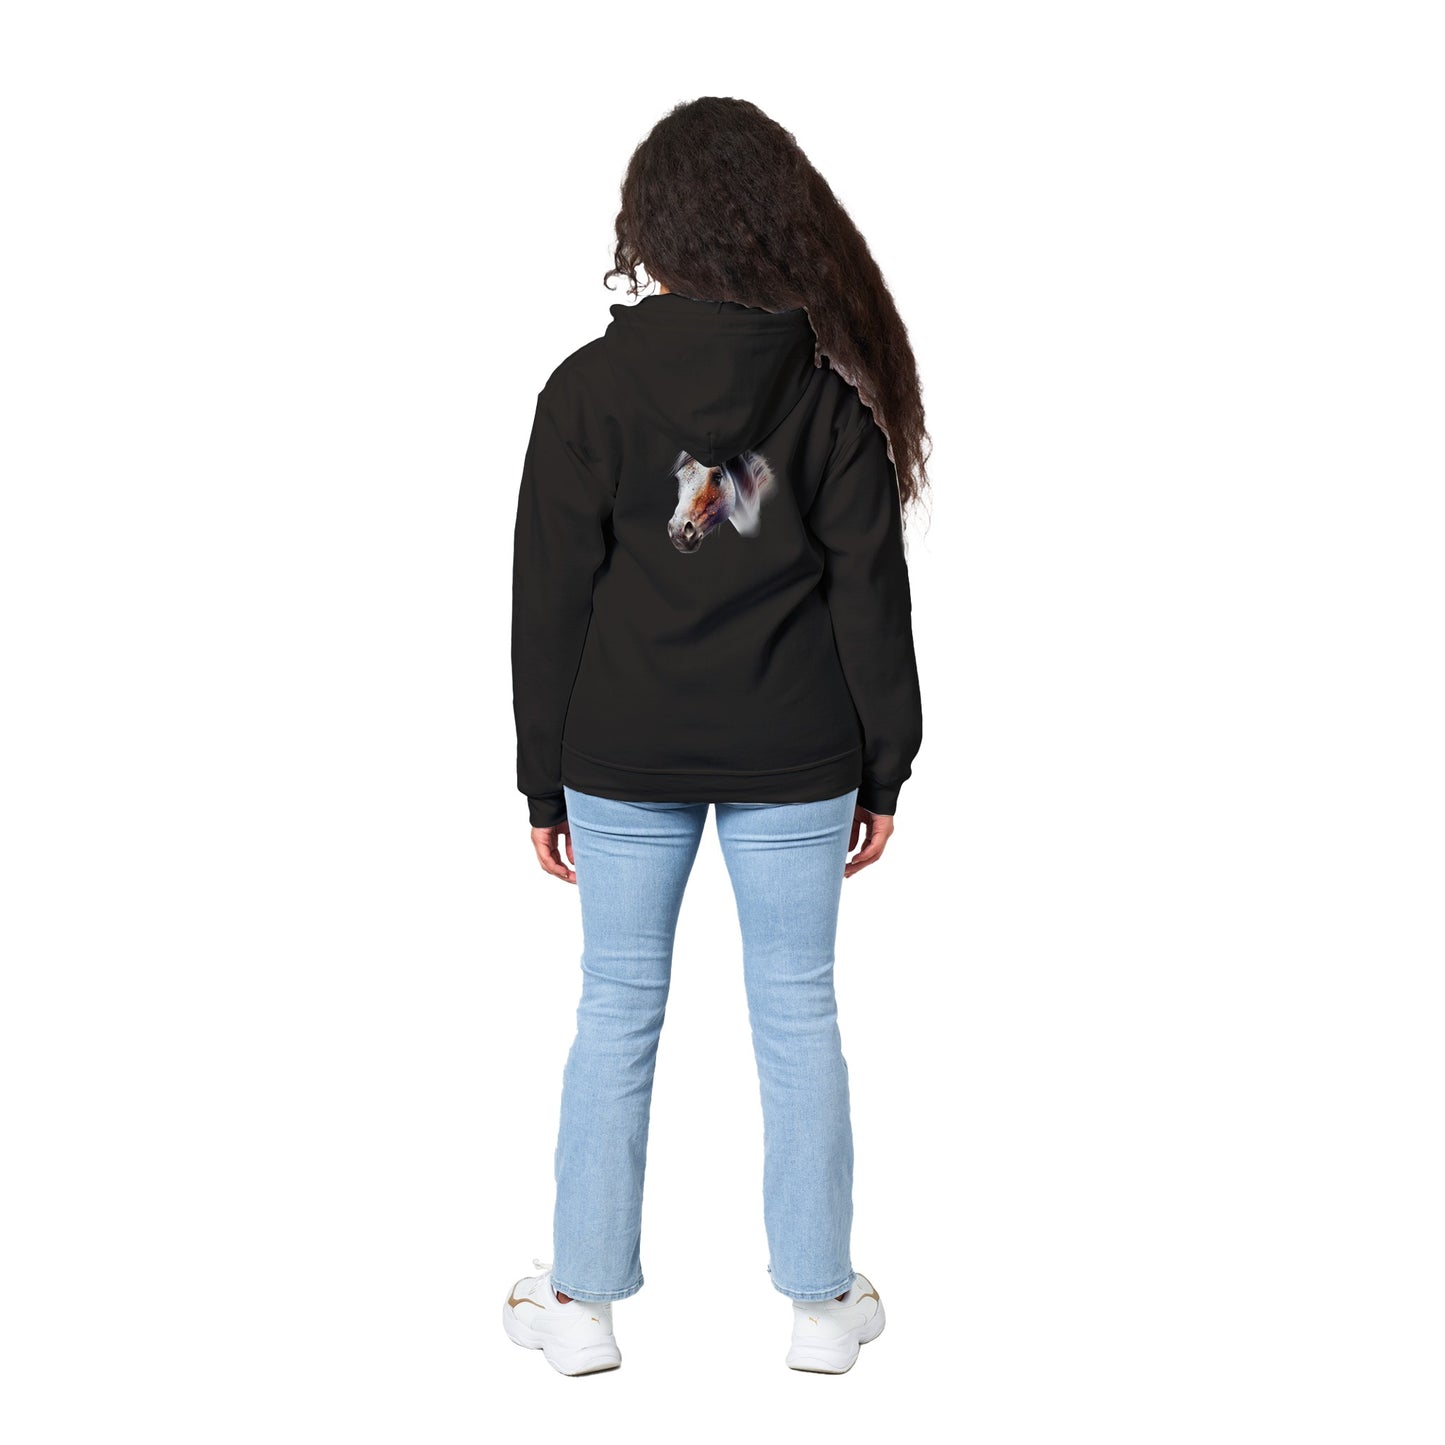 Shiny and Peaceful Fantasy Horse - Unisex Zip Hoodie